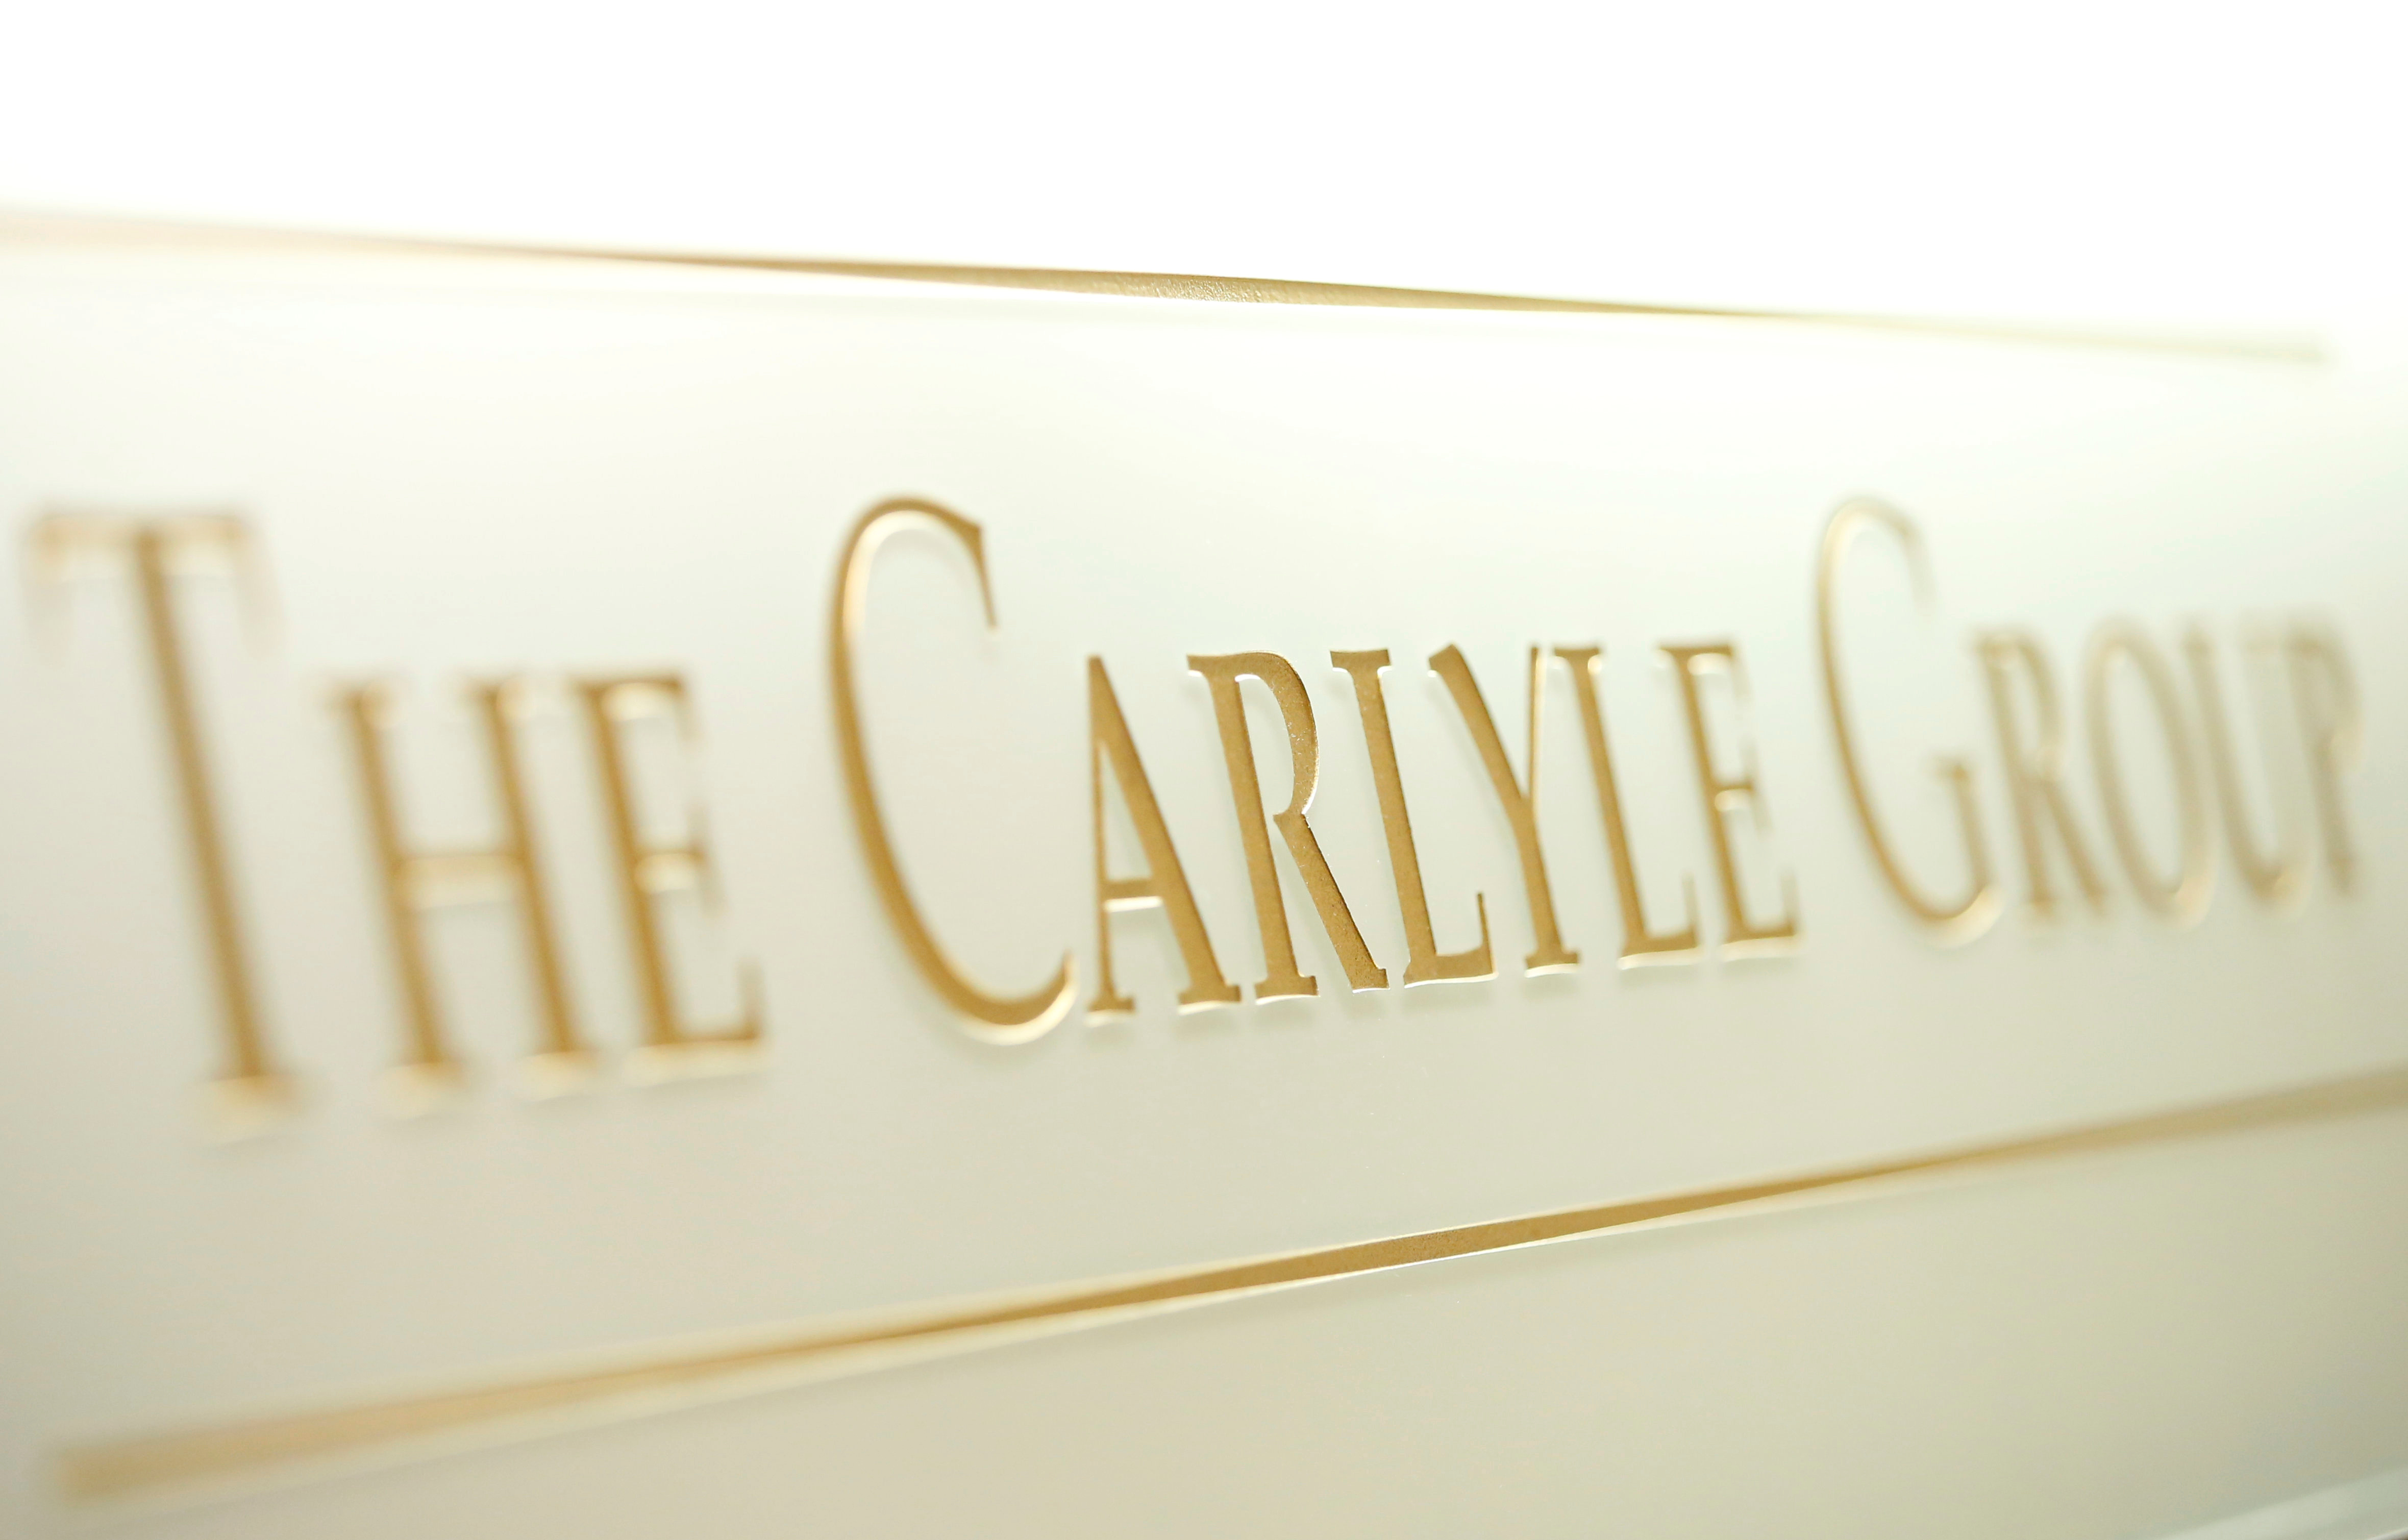 The logo of The Carlyle Group is displayed at the company's office in Tokyo